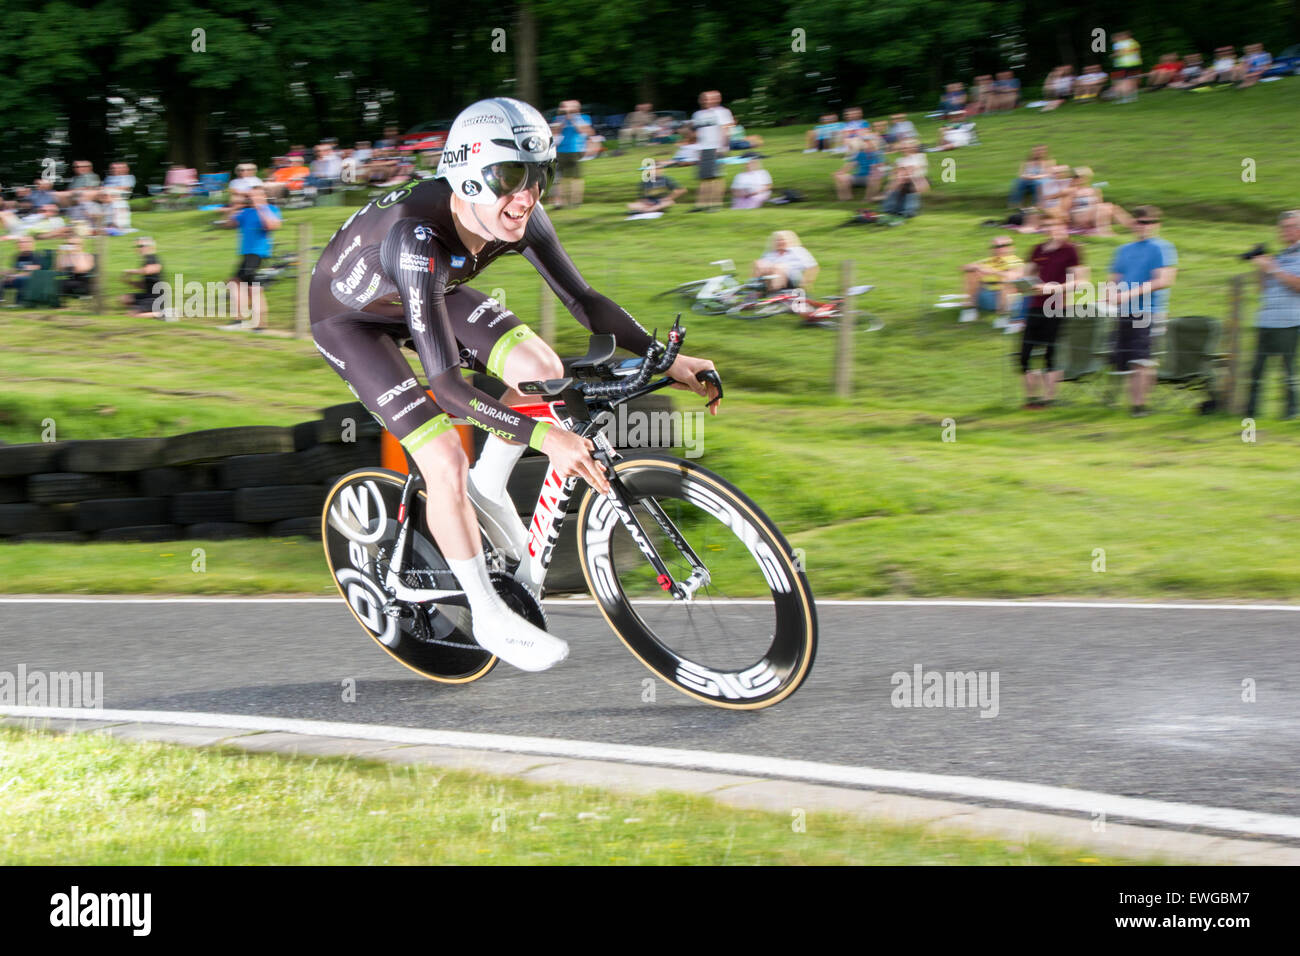 Lincoln, UK. 25th June, 2015. Matthew Bottrill (www.drag2zero.com) competes in the British Cycling Time Trial Championships at Cadwell Park near Lincoln, United Kingdom on 25 June 2015. A pre-race favourite, Bottrill was caught by winner Alex Dowsett (Movistar) and finished out of the medals. Credit:  Andrew Peat/Alamy Live News Stock Photo